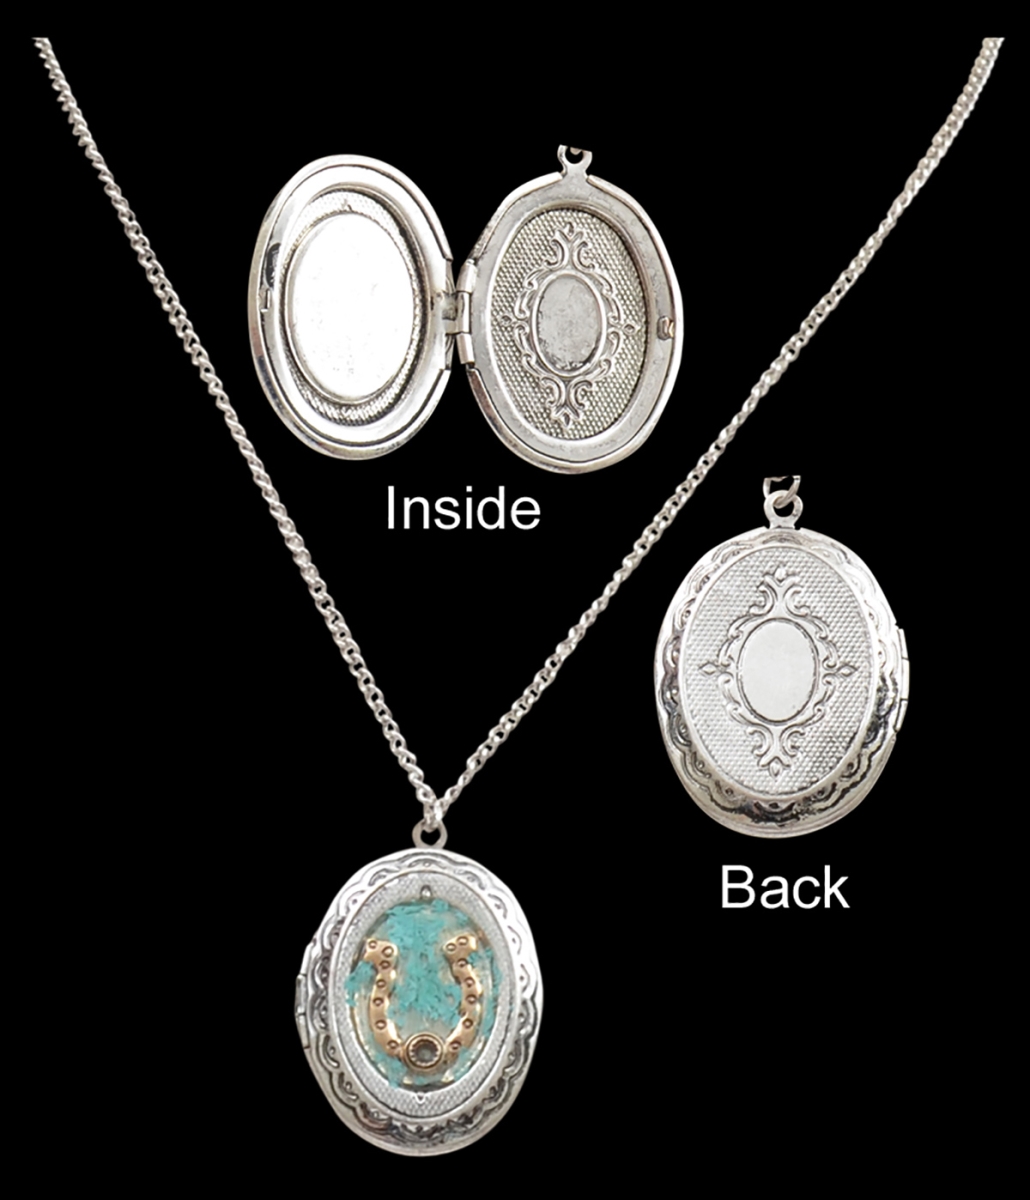 Dn0661 Silver Locket Style Necklace With Go Locket